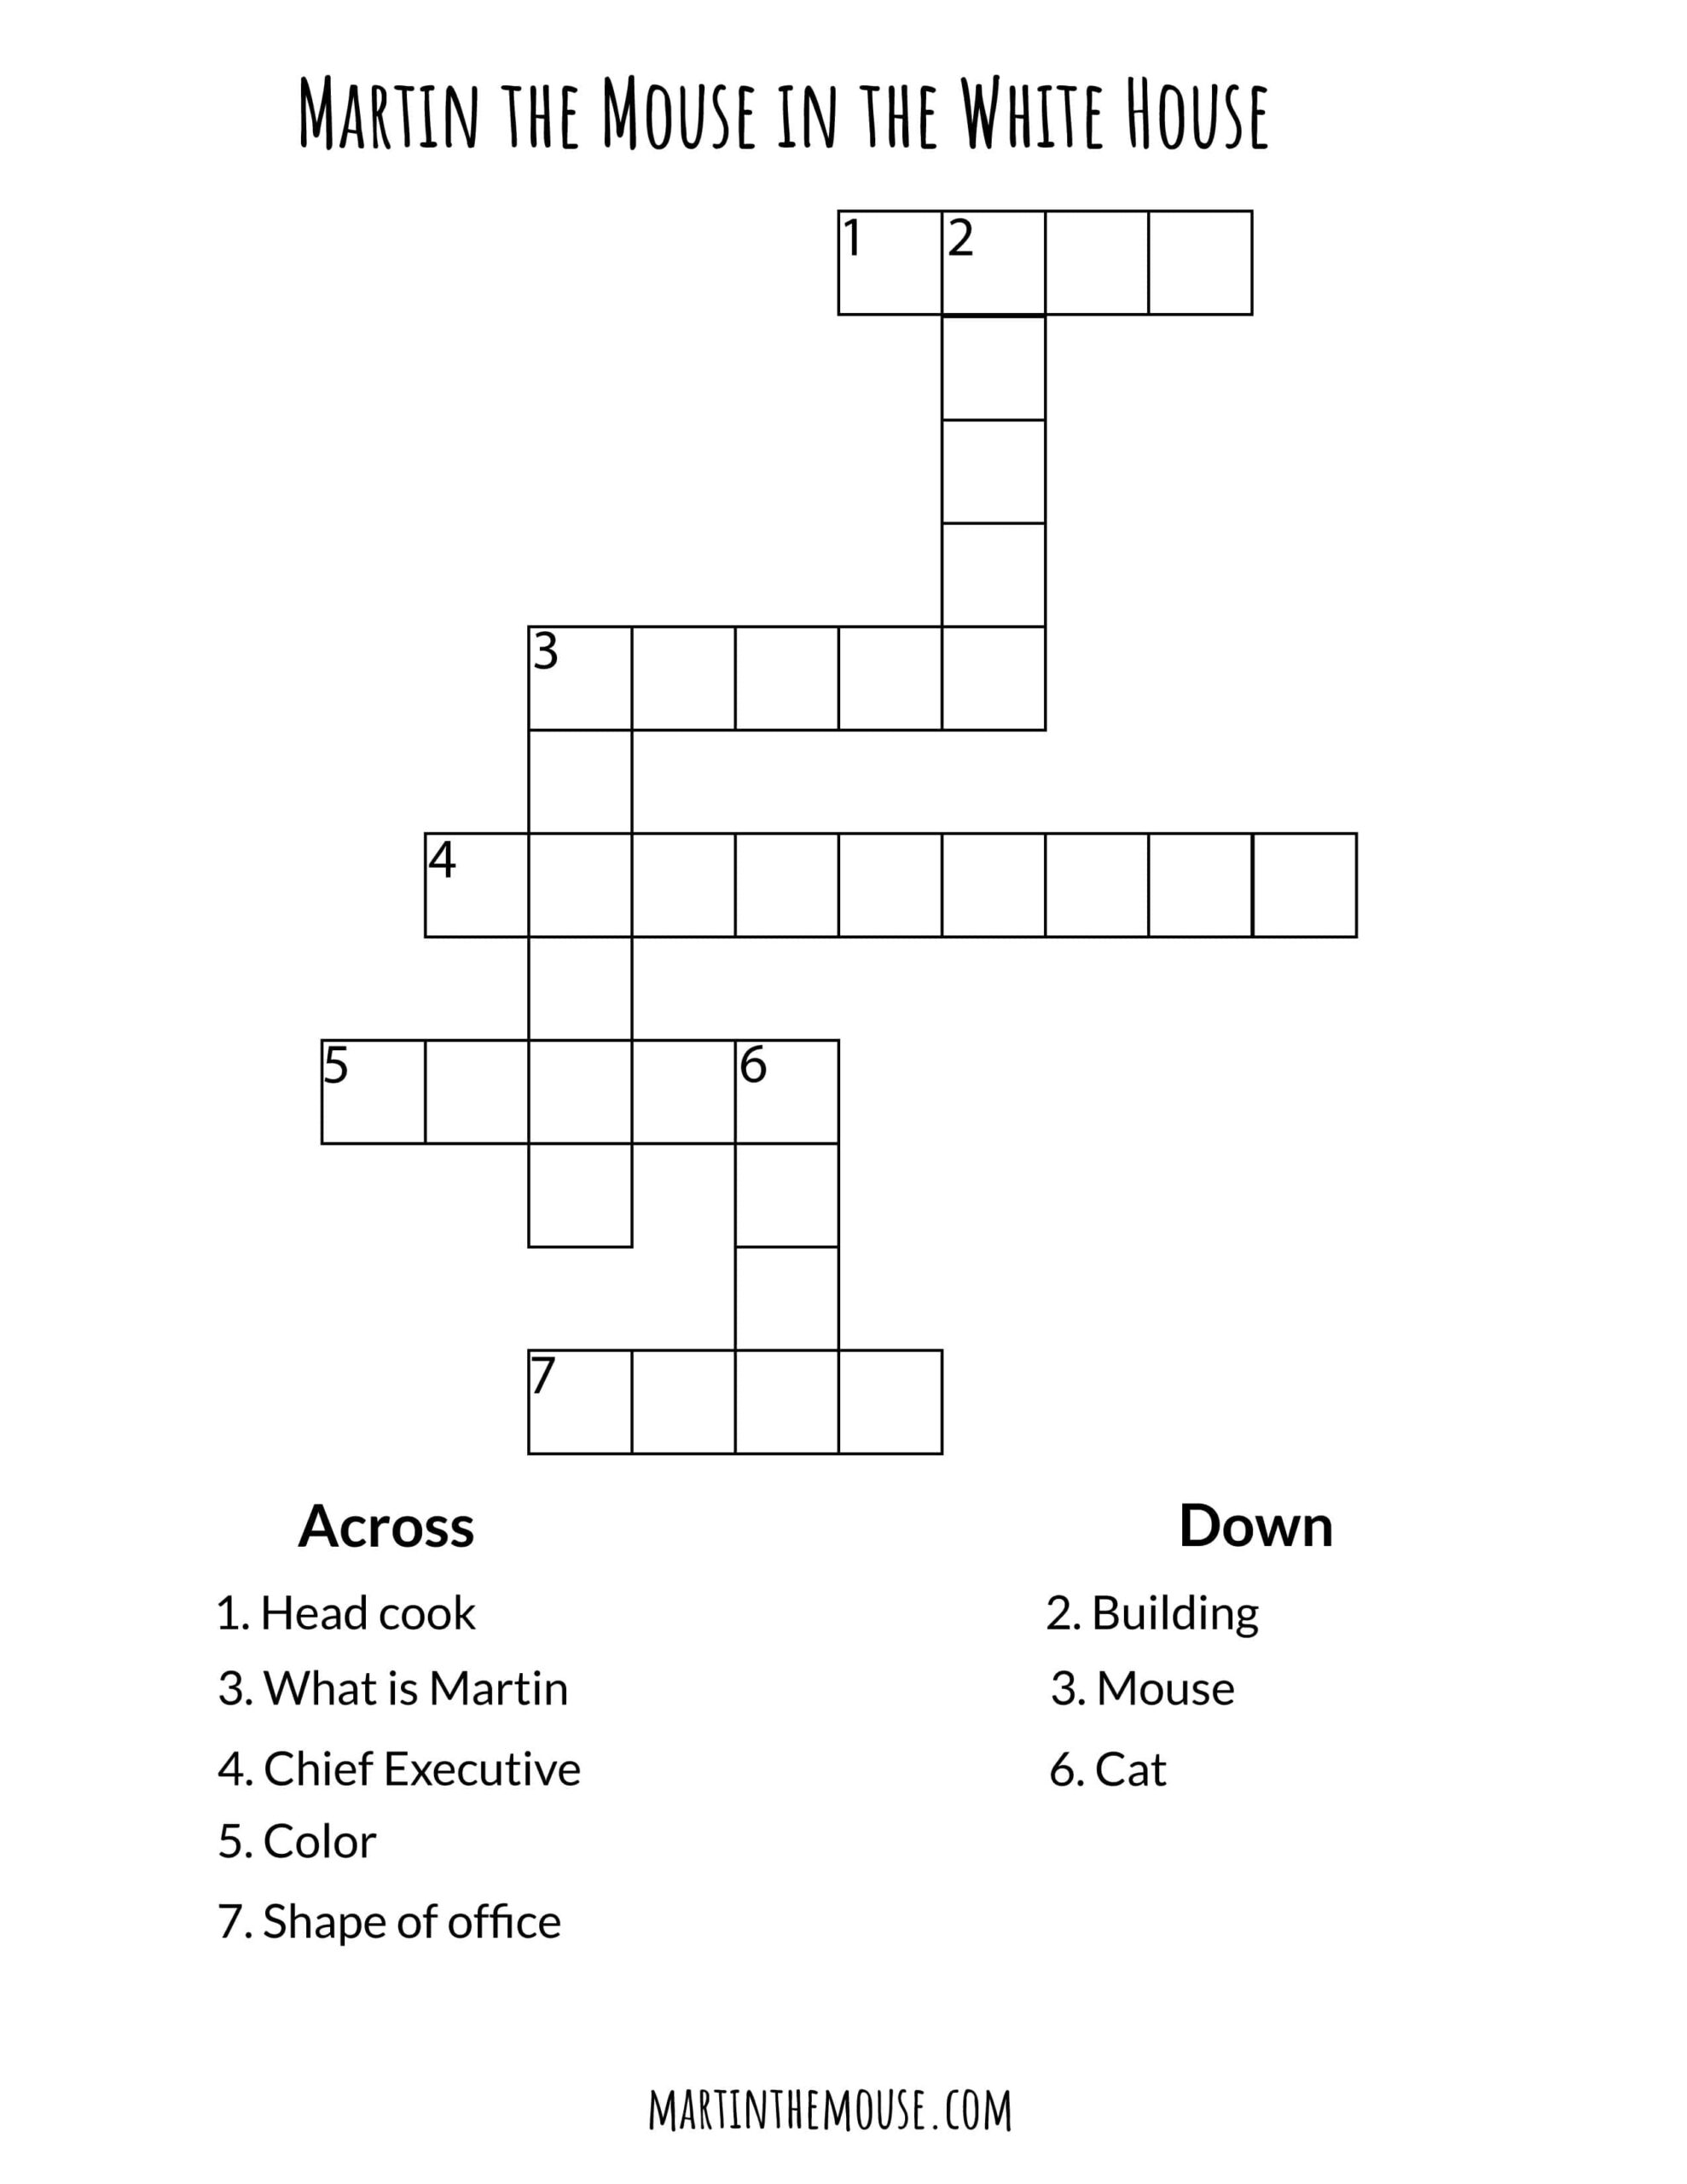 Martin the Mouse in the White House Crossword Puzzle